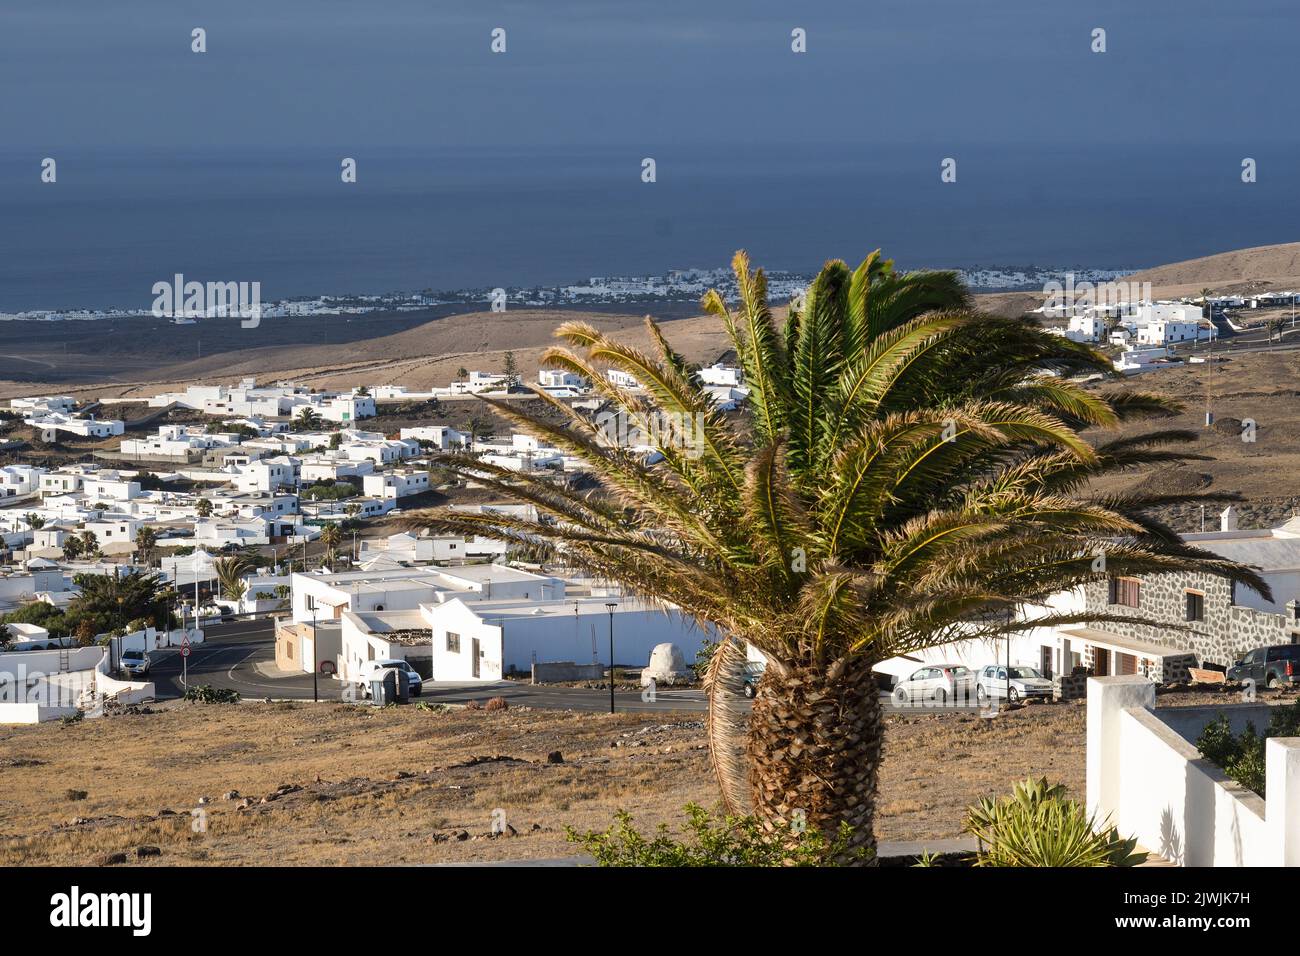 Municipality of Tías in Lanzarote, at sunrise Stock Photo